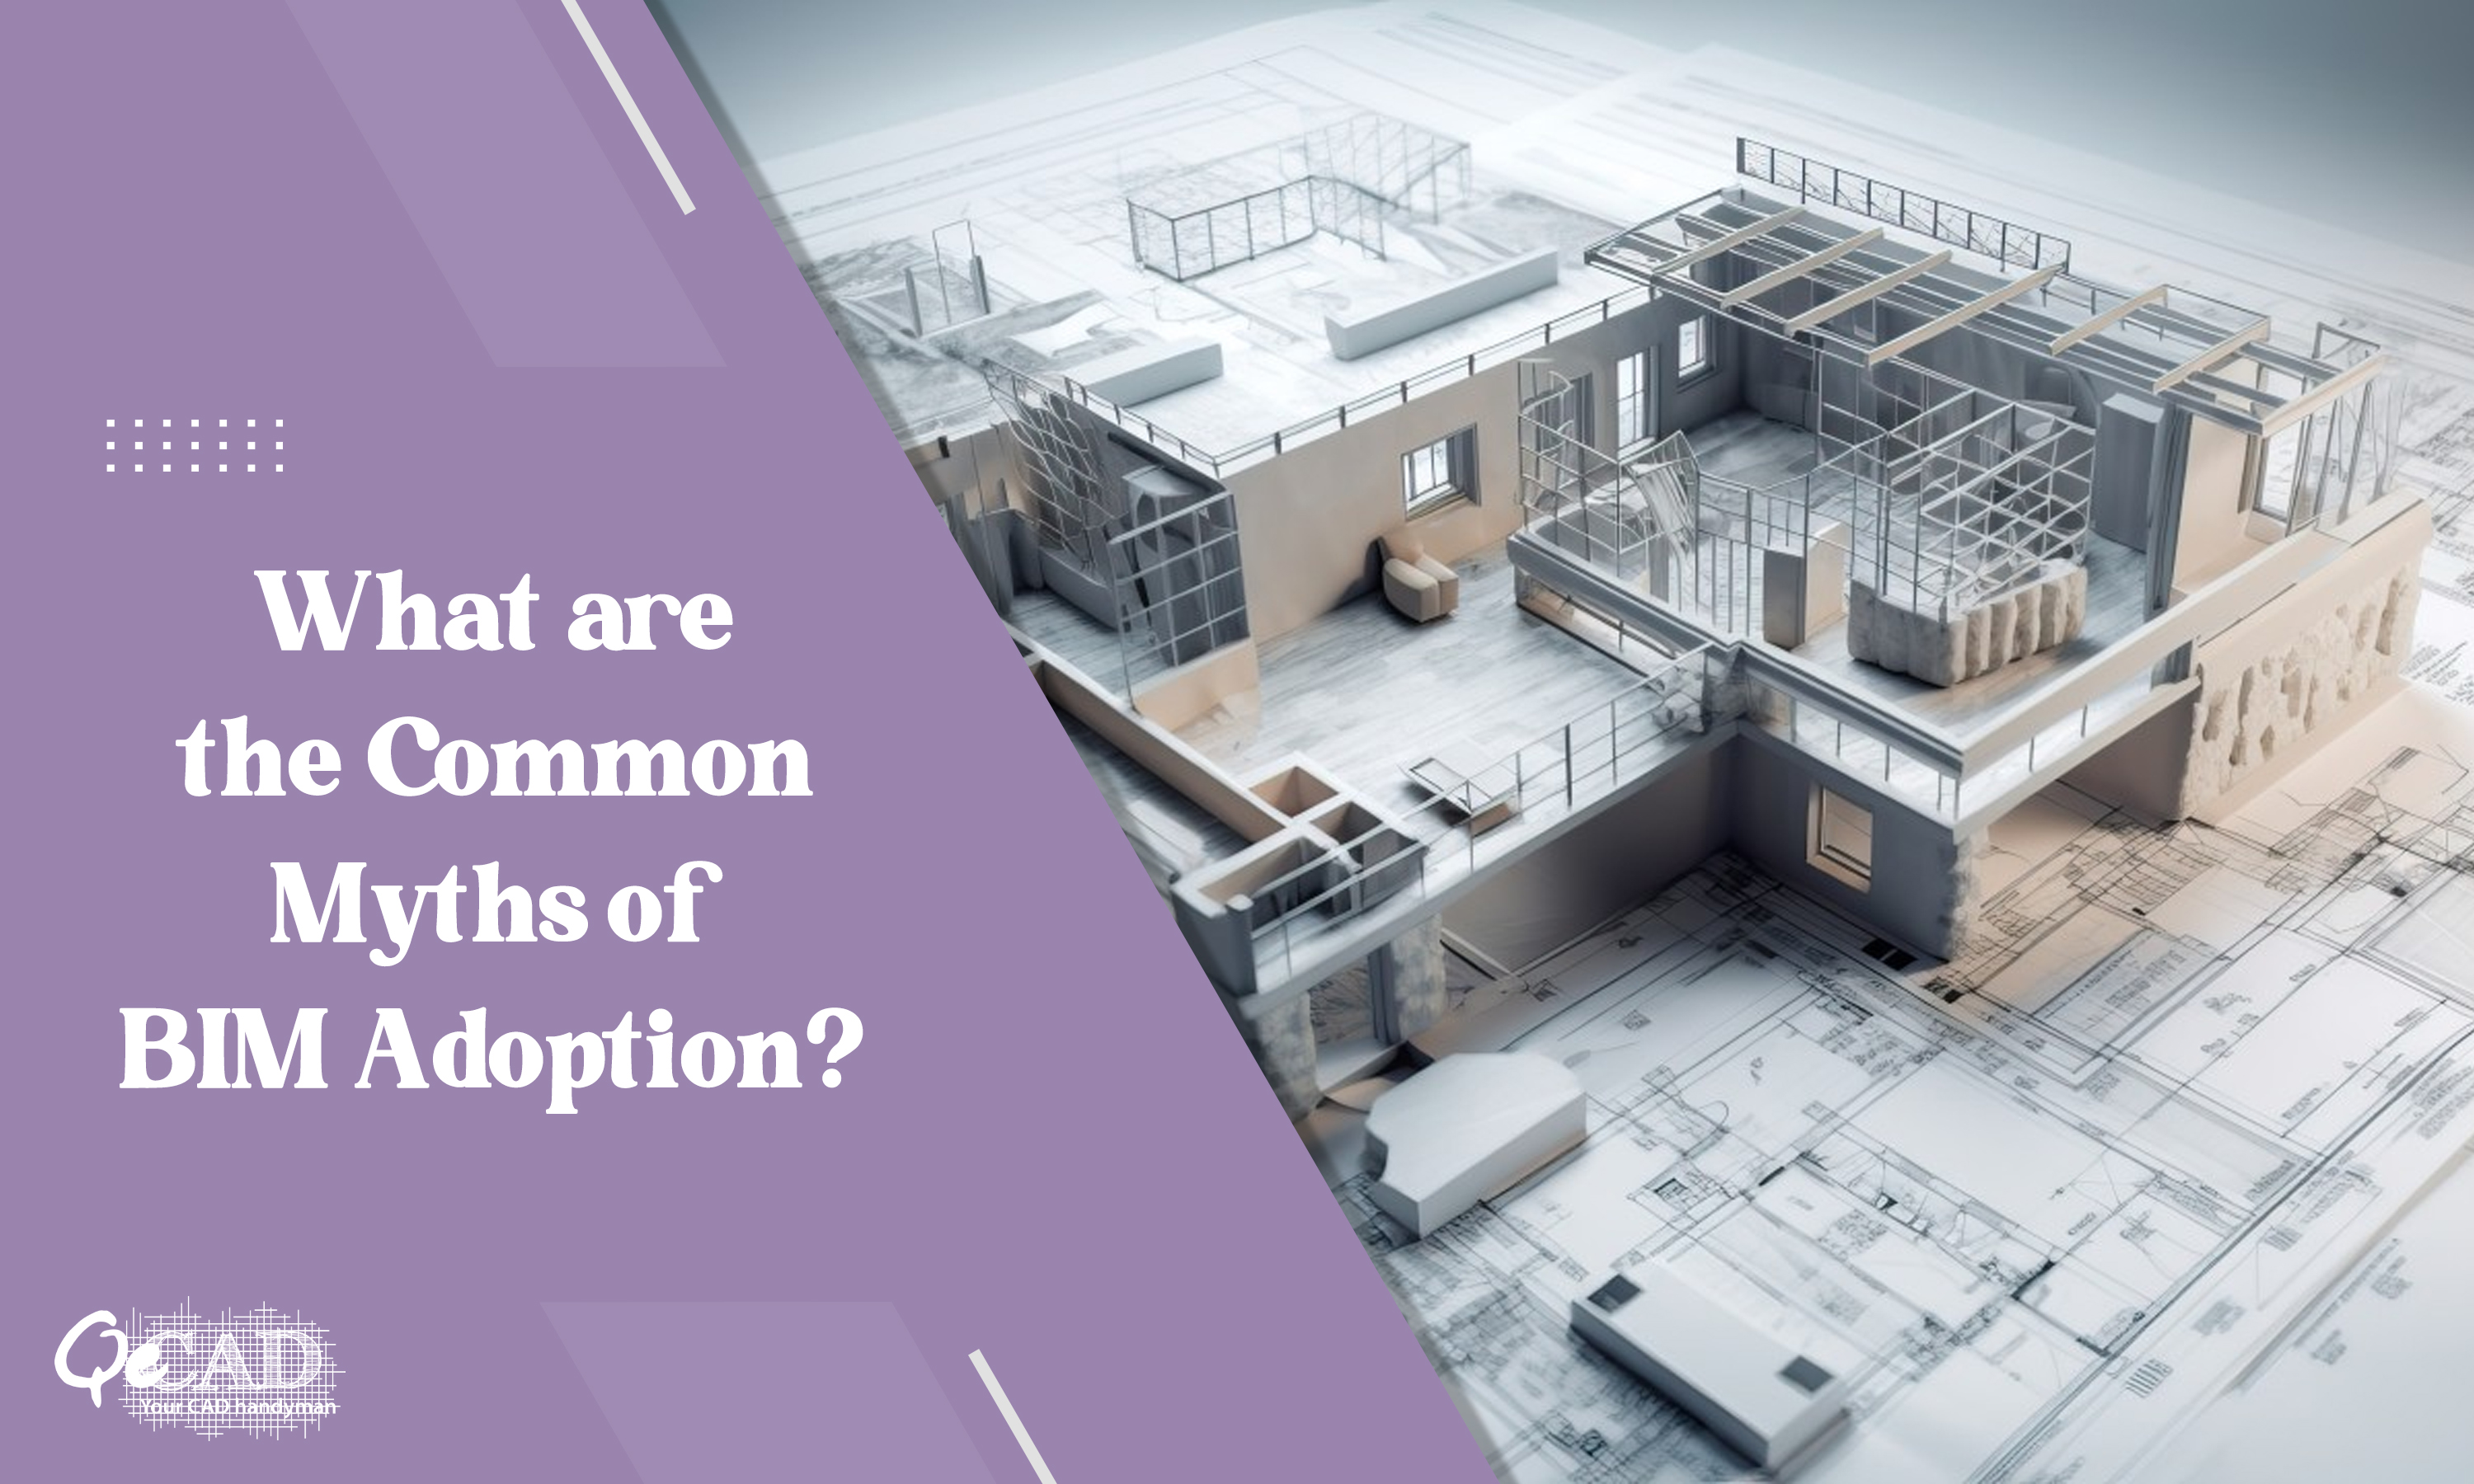 What are the Common Myths of BIM Adoption?